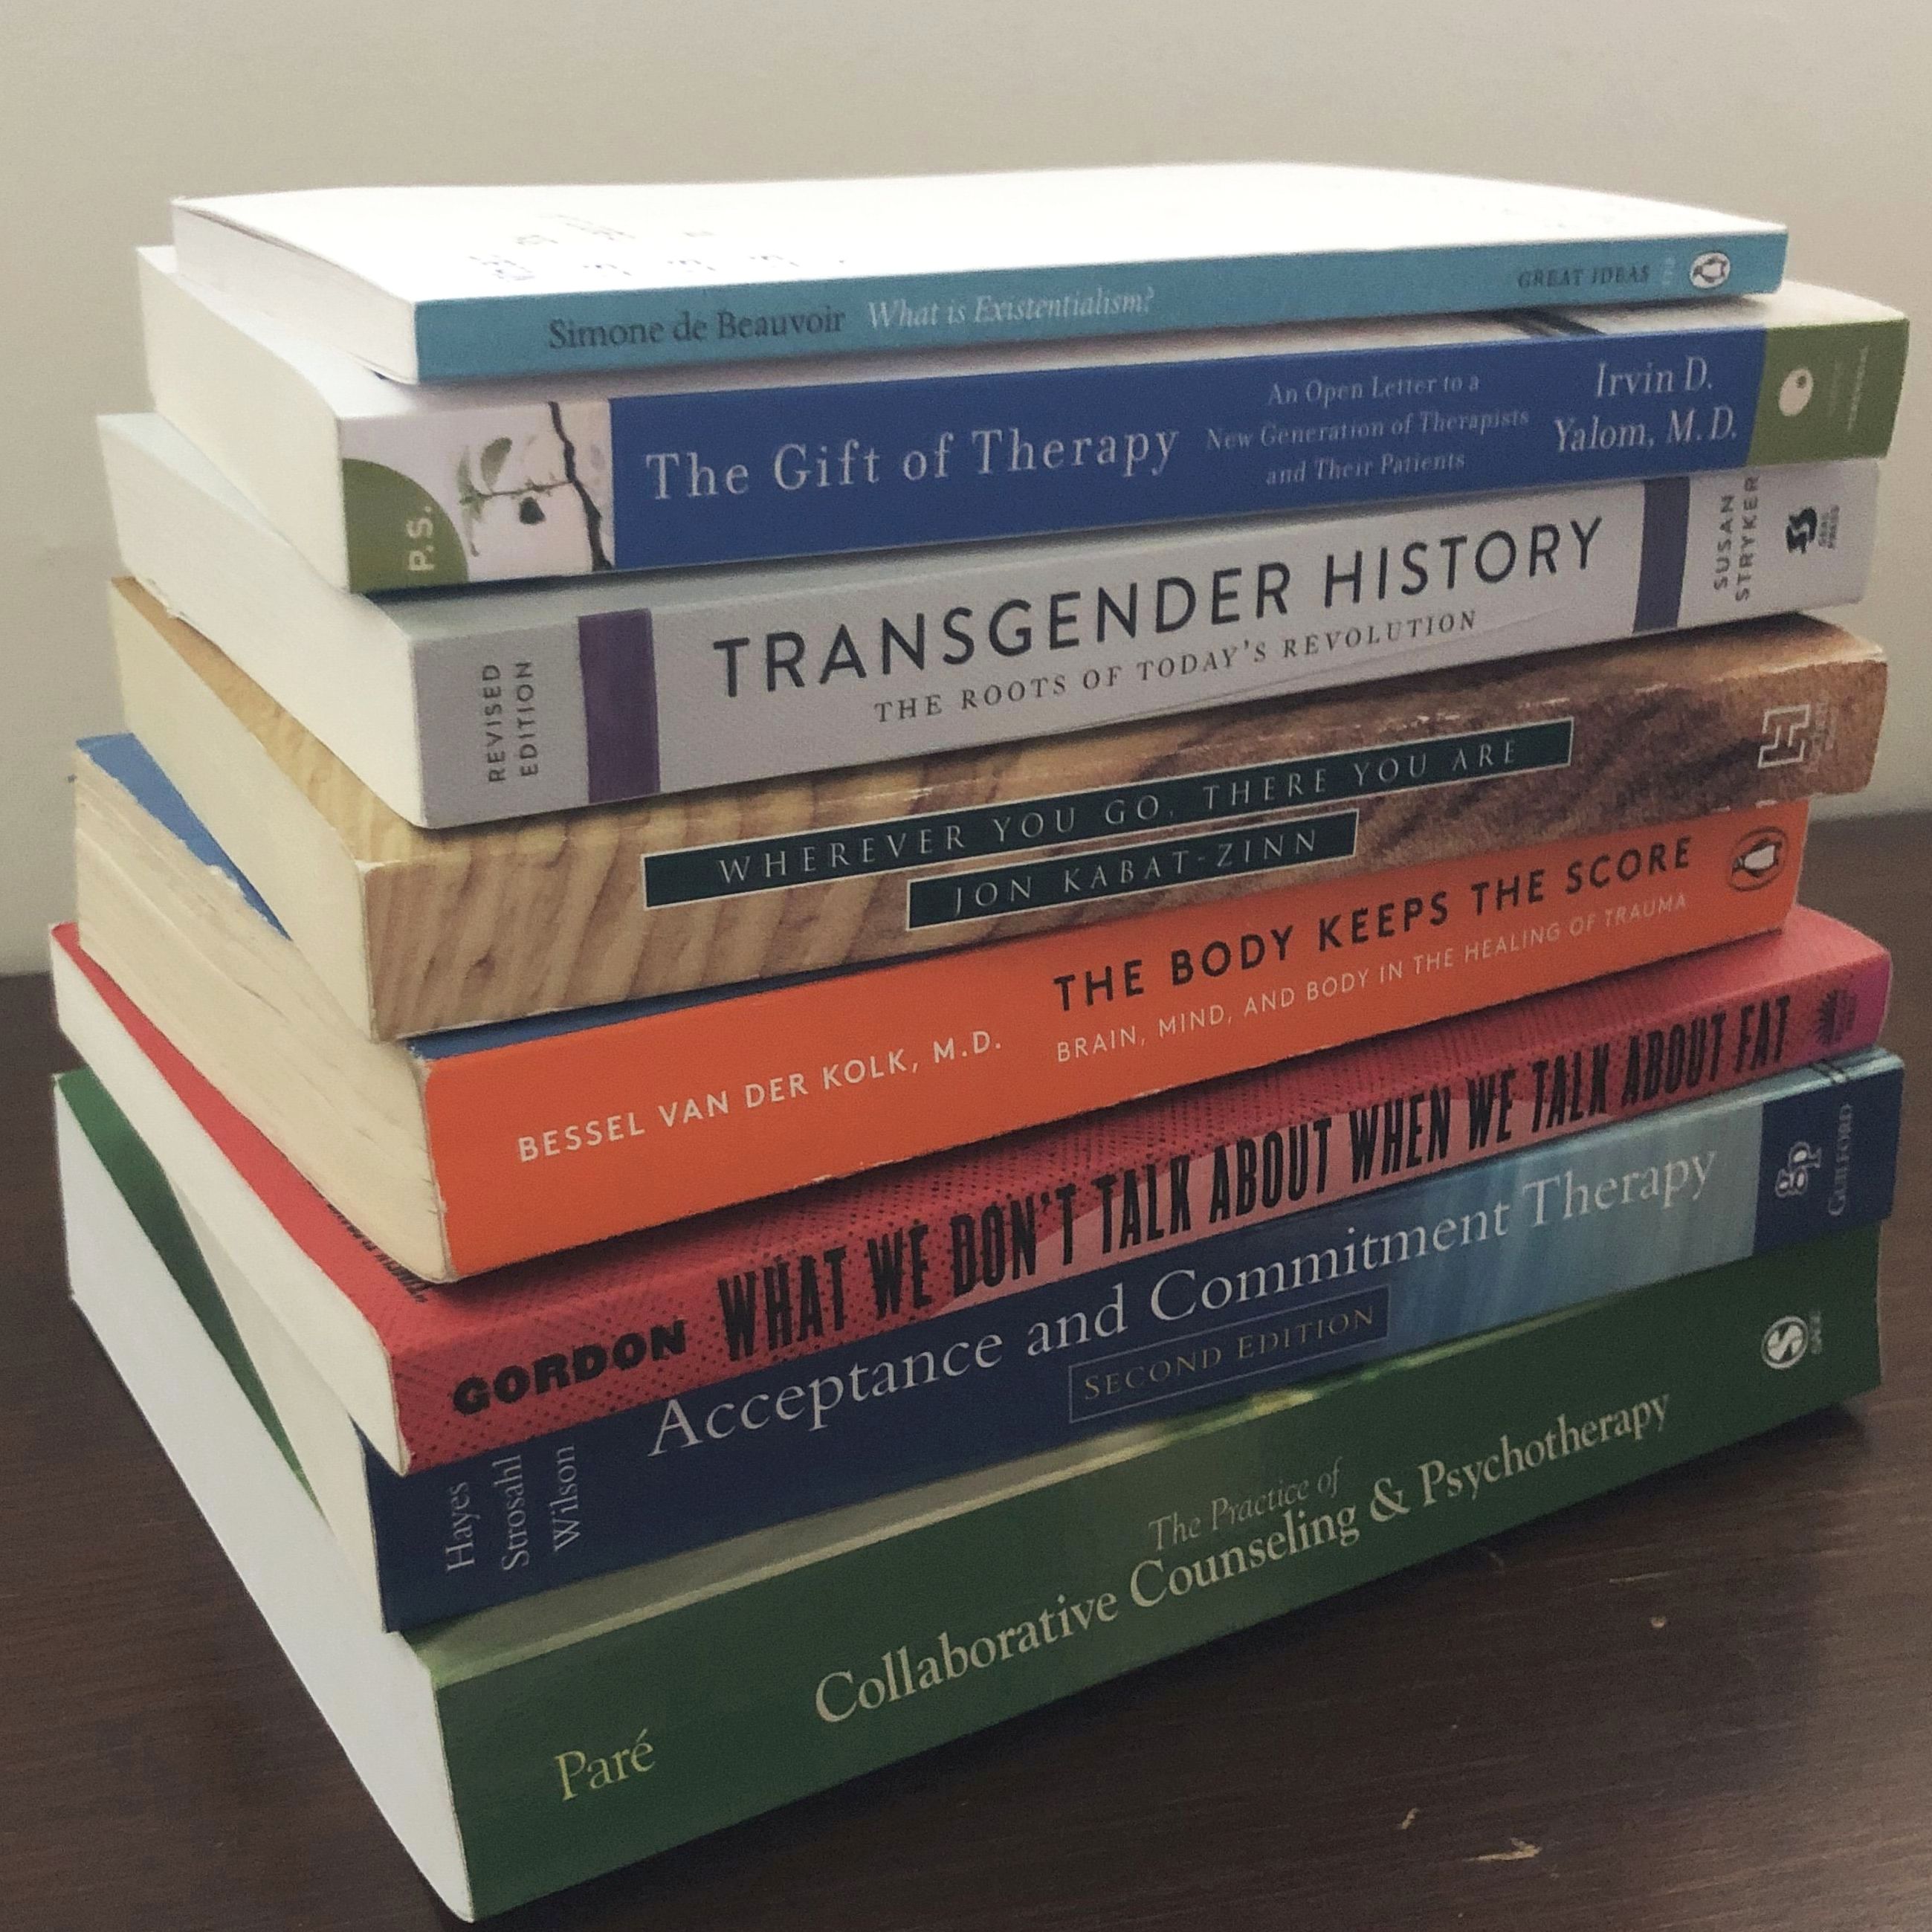 A stack of books. The following titles and authors are visible: ‘What is Existentialism?’ by Simone de Beauvoir; ‘The Gift of Therapy’ by Irvin D. Yalom; ‘Transgender History’ by Susan Stryker; ‘Wherever You Go, There You Are’ by Jon Kabat-Zinn; ‘The Body Keeps the Score’ by Bessel van der Kolk; ‘What We Don’t Talk About When We Talk About Fat’ by Gordon; ‘Acceptance and Commitment Therapy’ by Hayes, Stroshal, and Wilson; and ‘Collaborative Counseling and Psychotherapy’ by Paré.